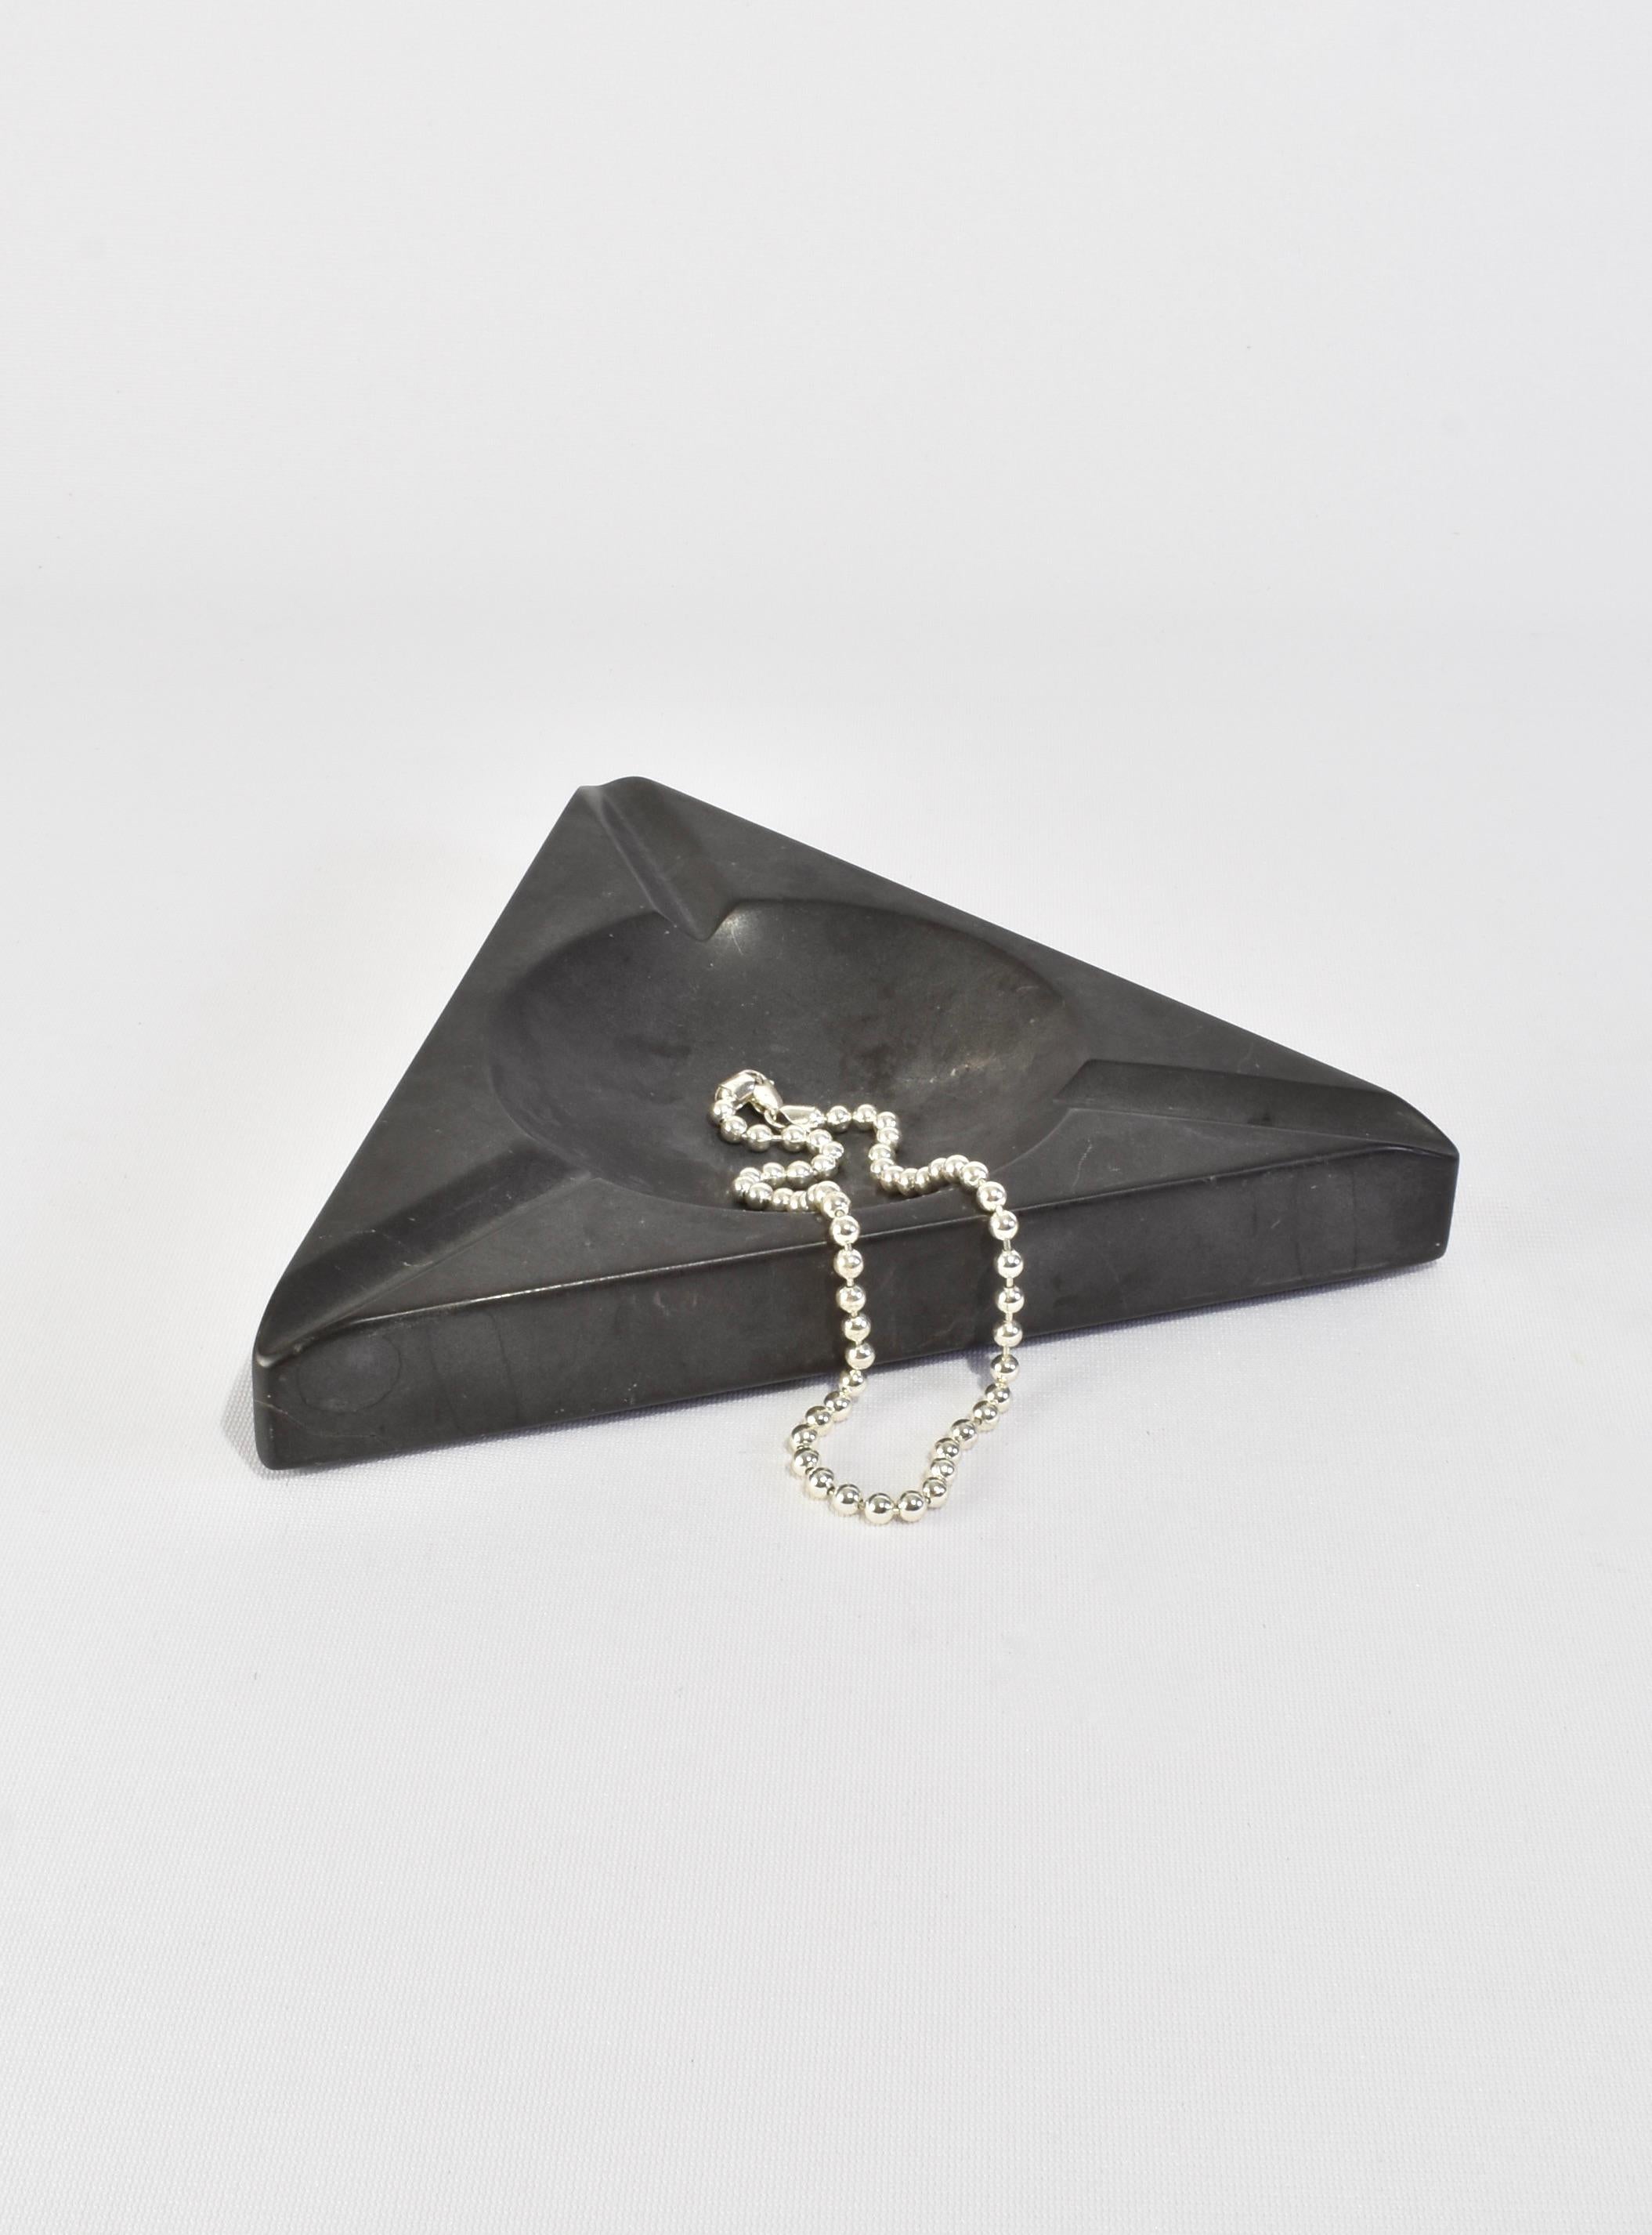 Black Stone Catchall In Good Condition For Sale In Richmond, VA